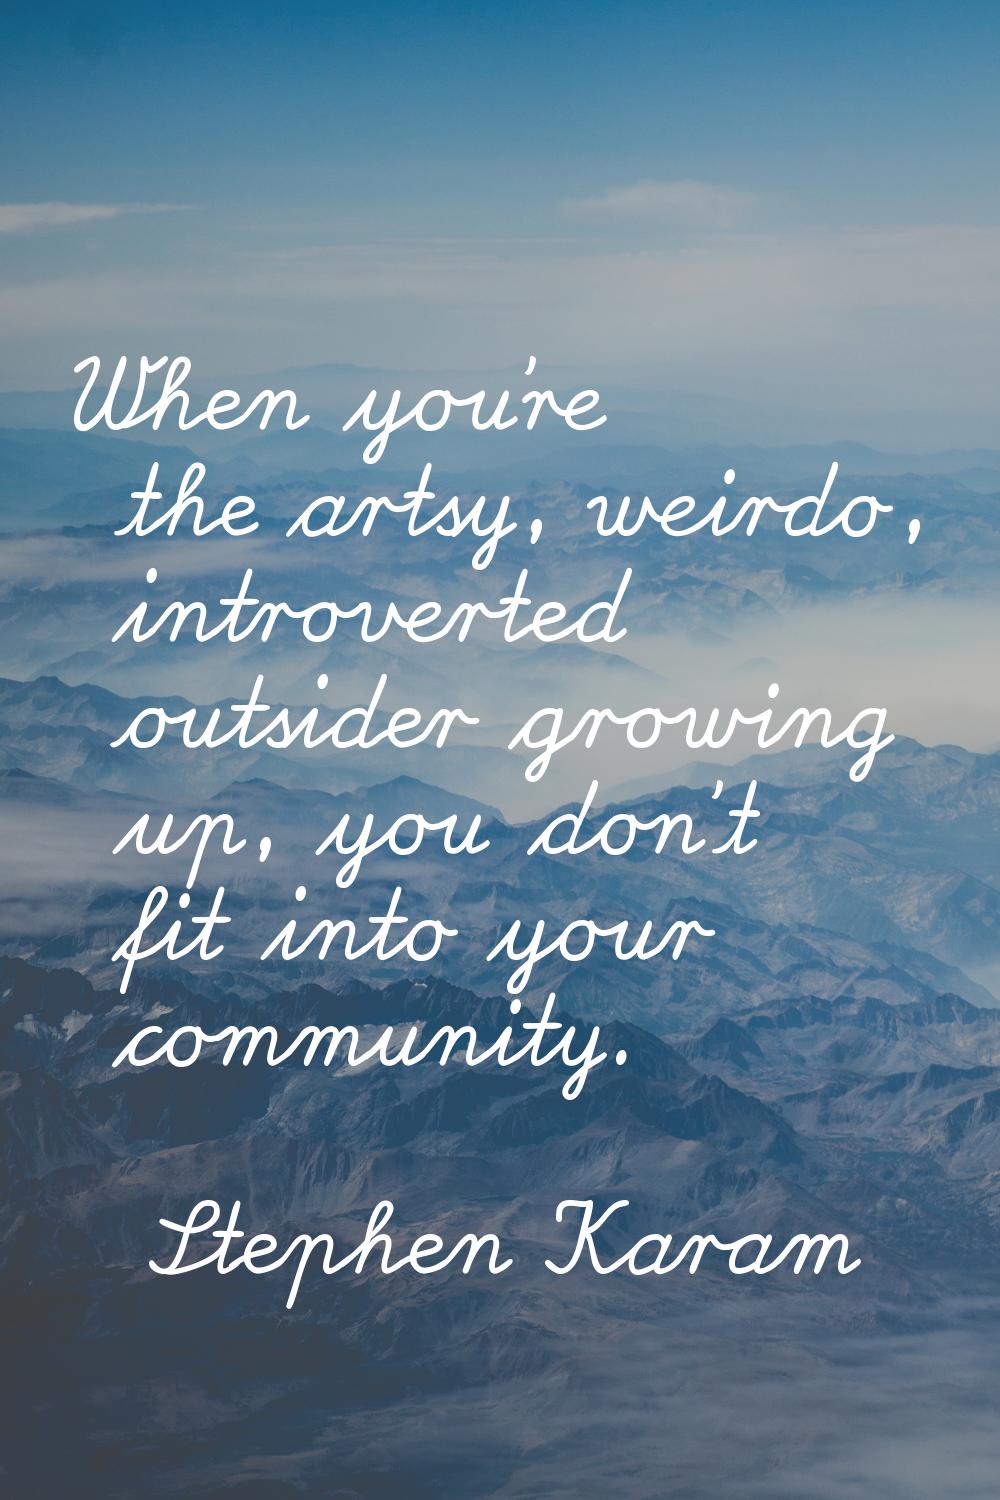 When you're the artsy, weirdo, introverted outsider growing up, you don't fit into your community.